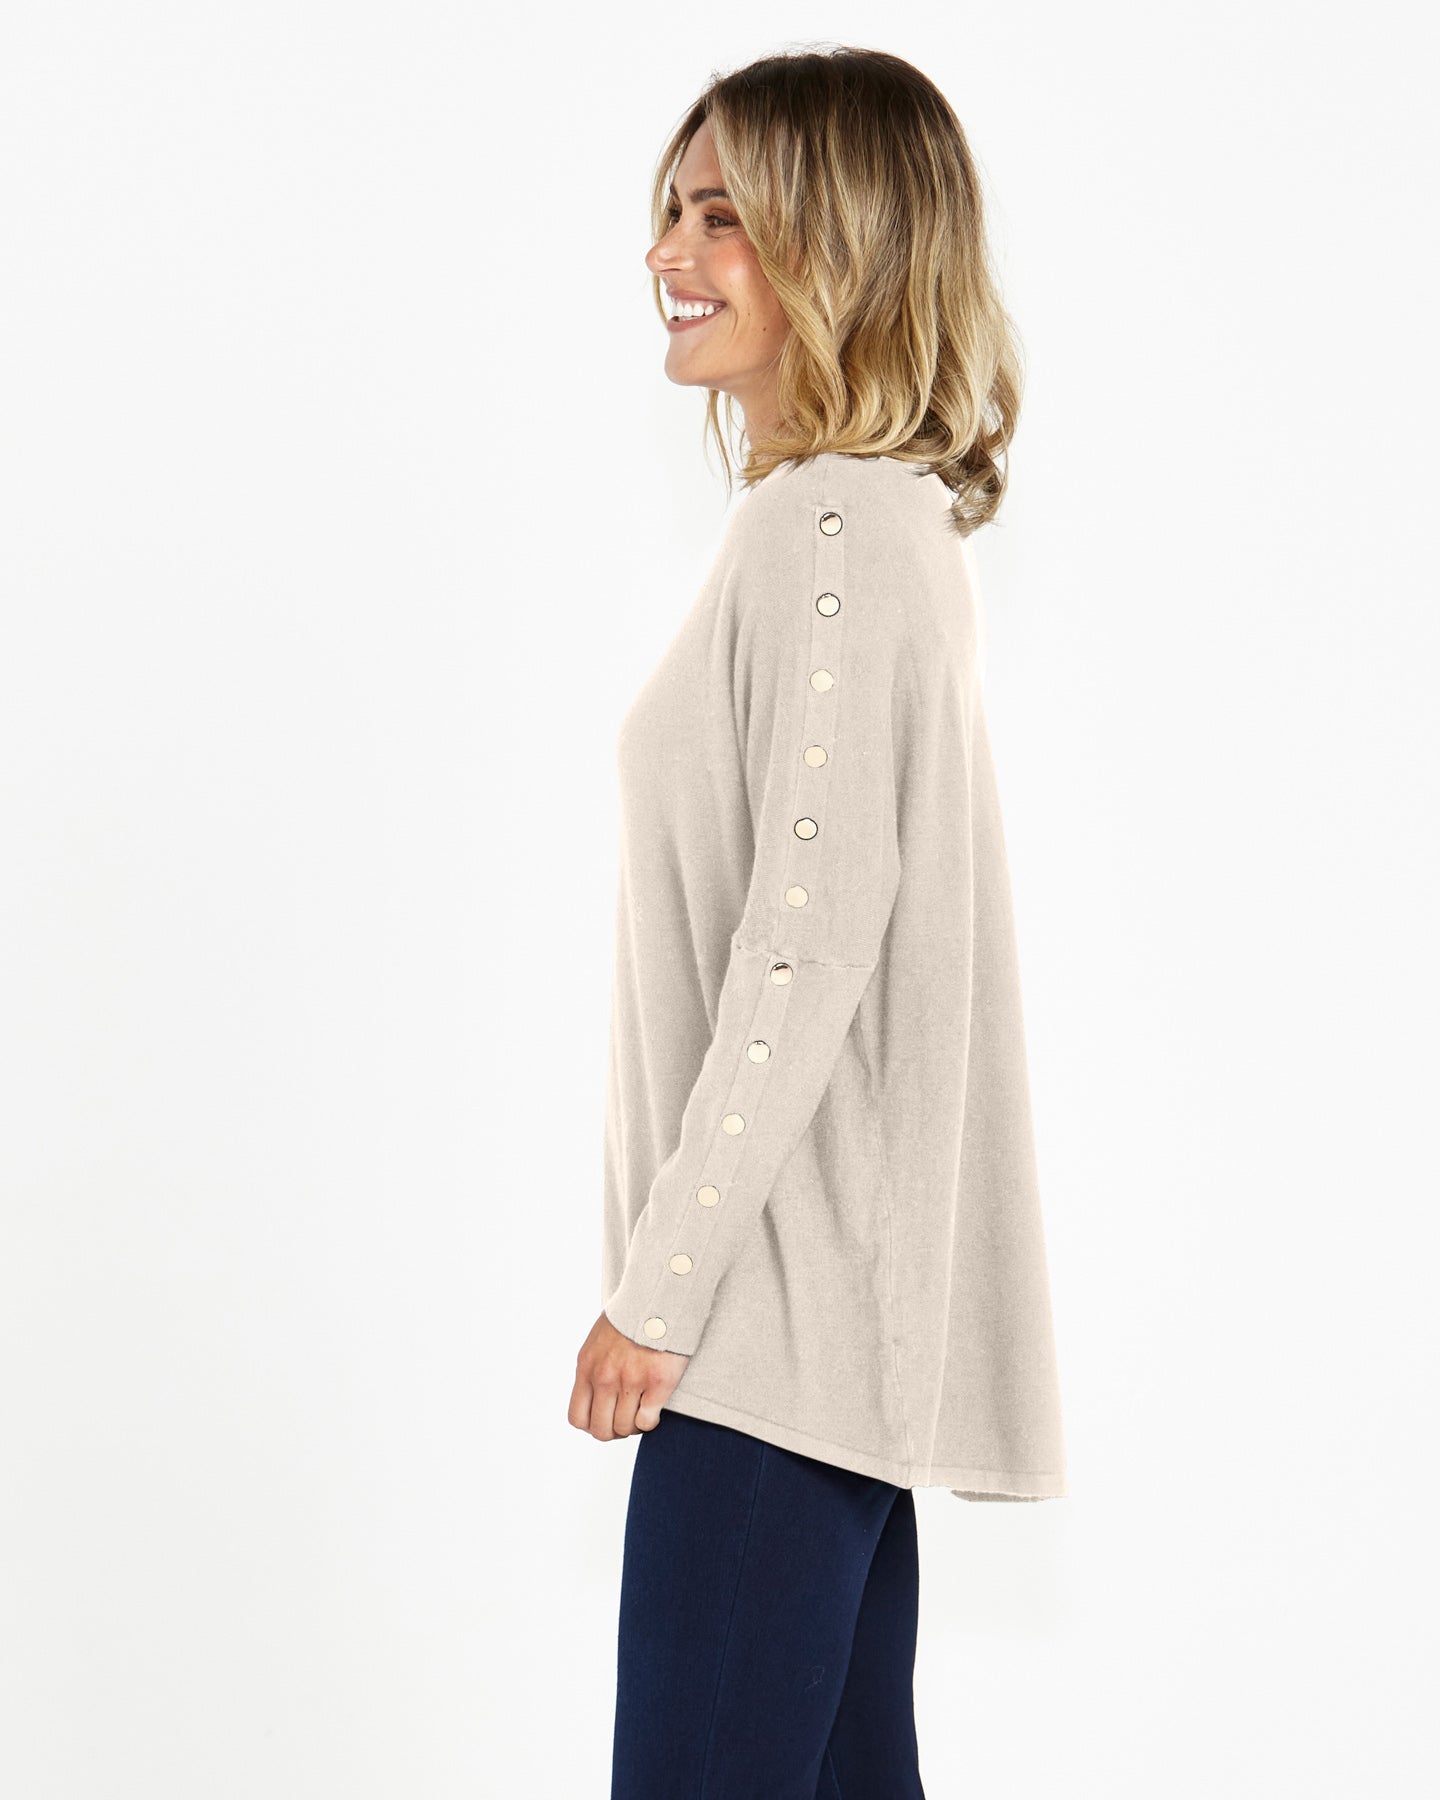 Bronte Knit Top - Wheat